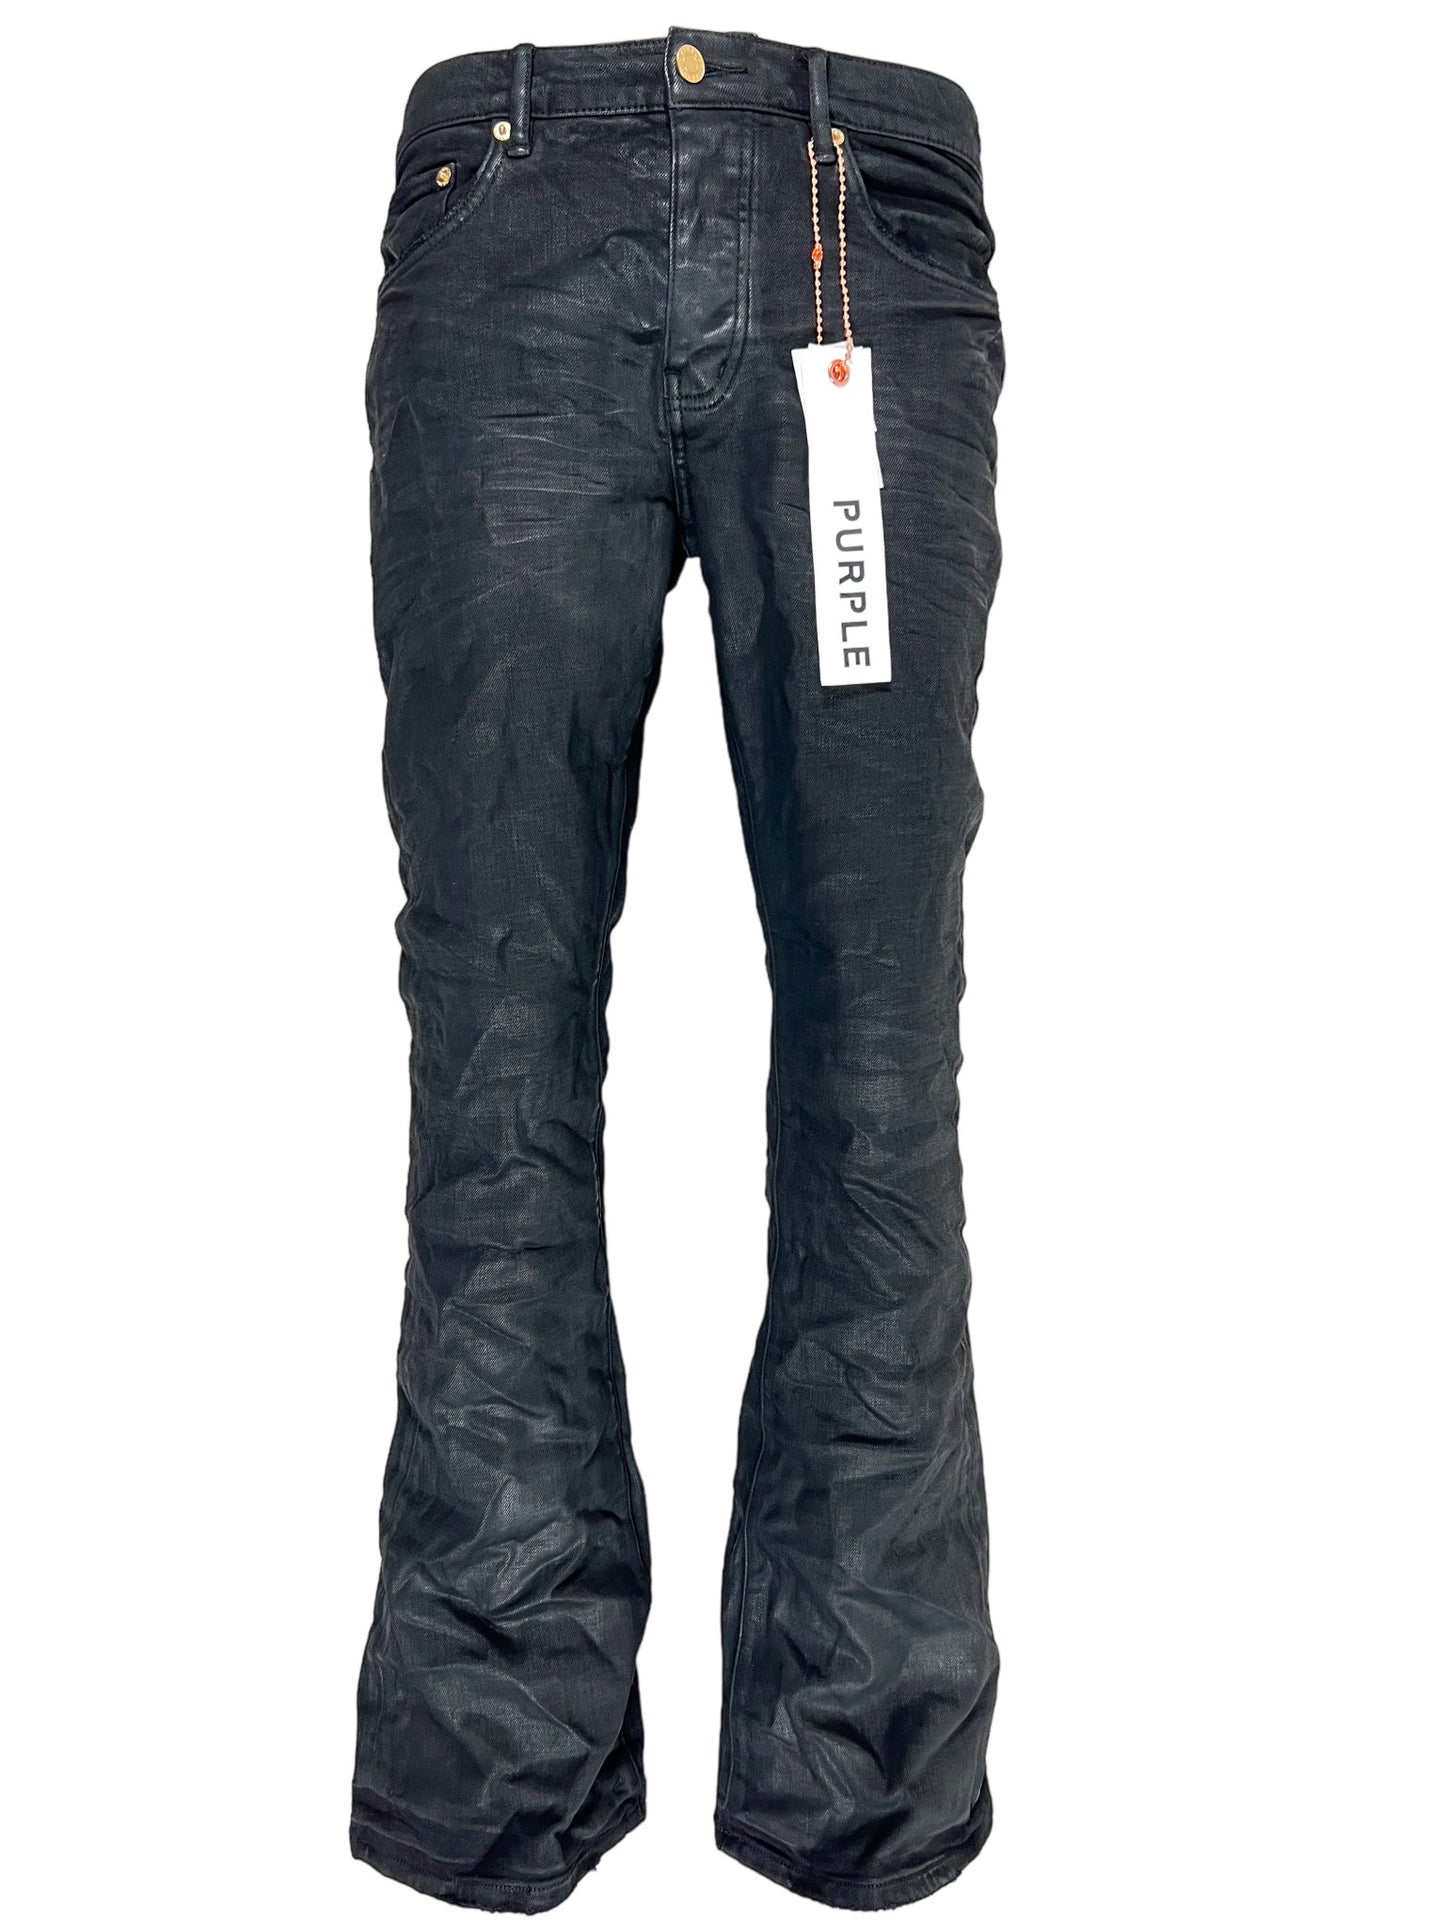 A pair of PURPLE BRAND P004-BCRB FLARE PRESSED COATED BLACK JEANS with a tag on them.